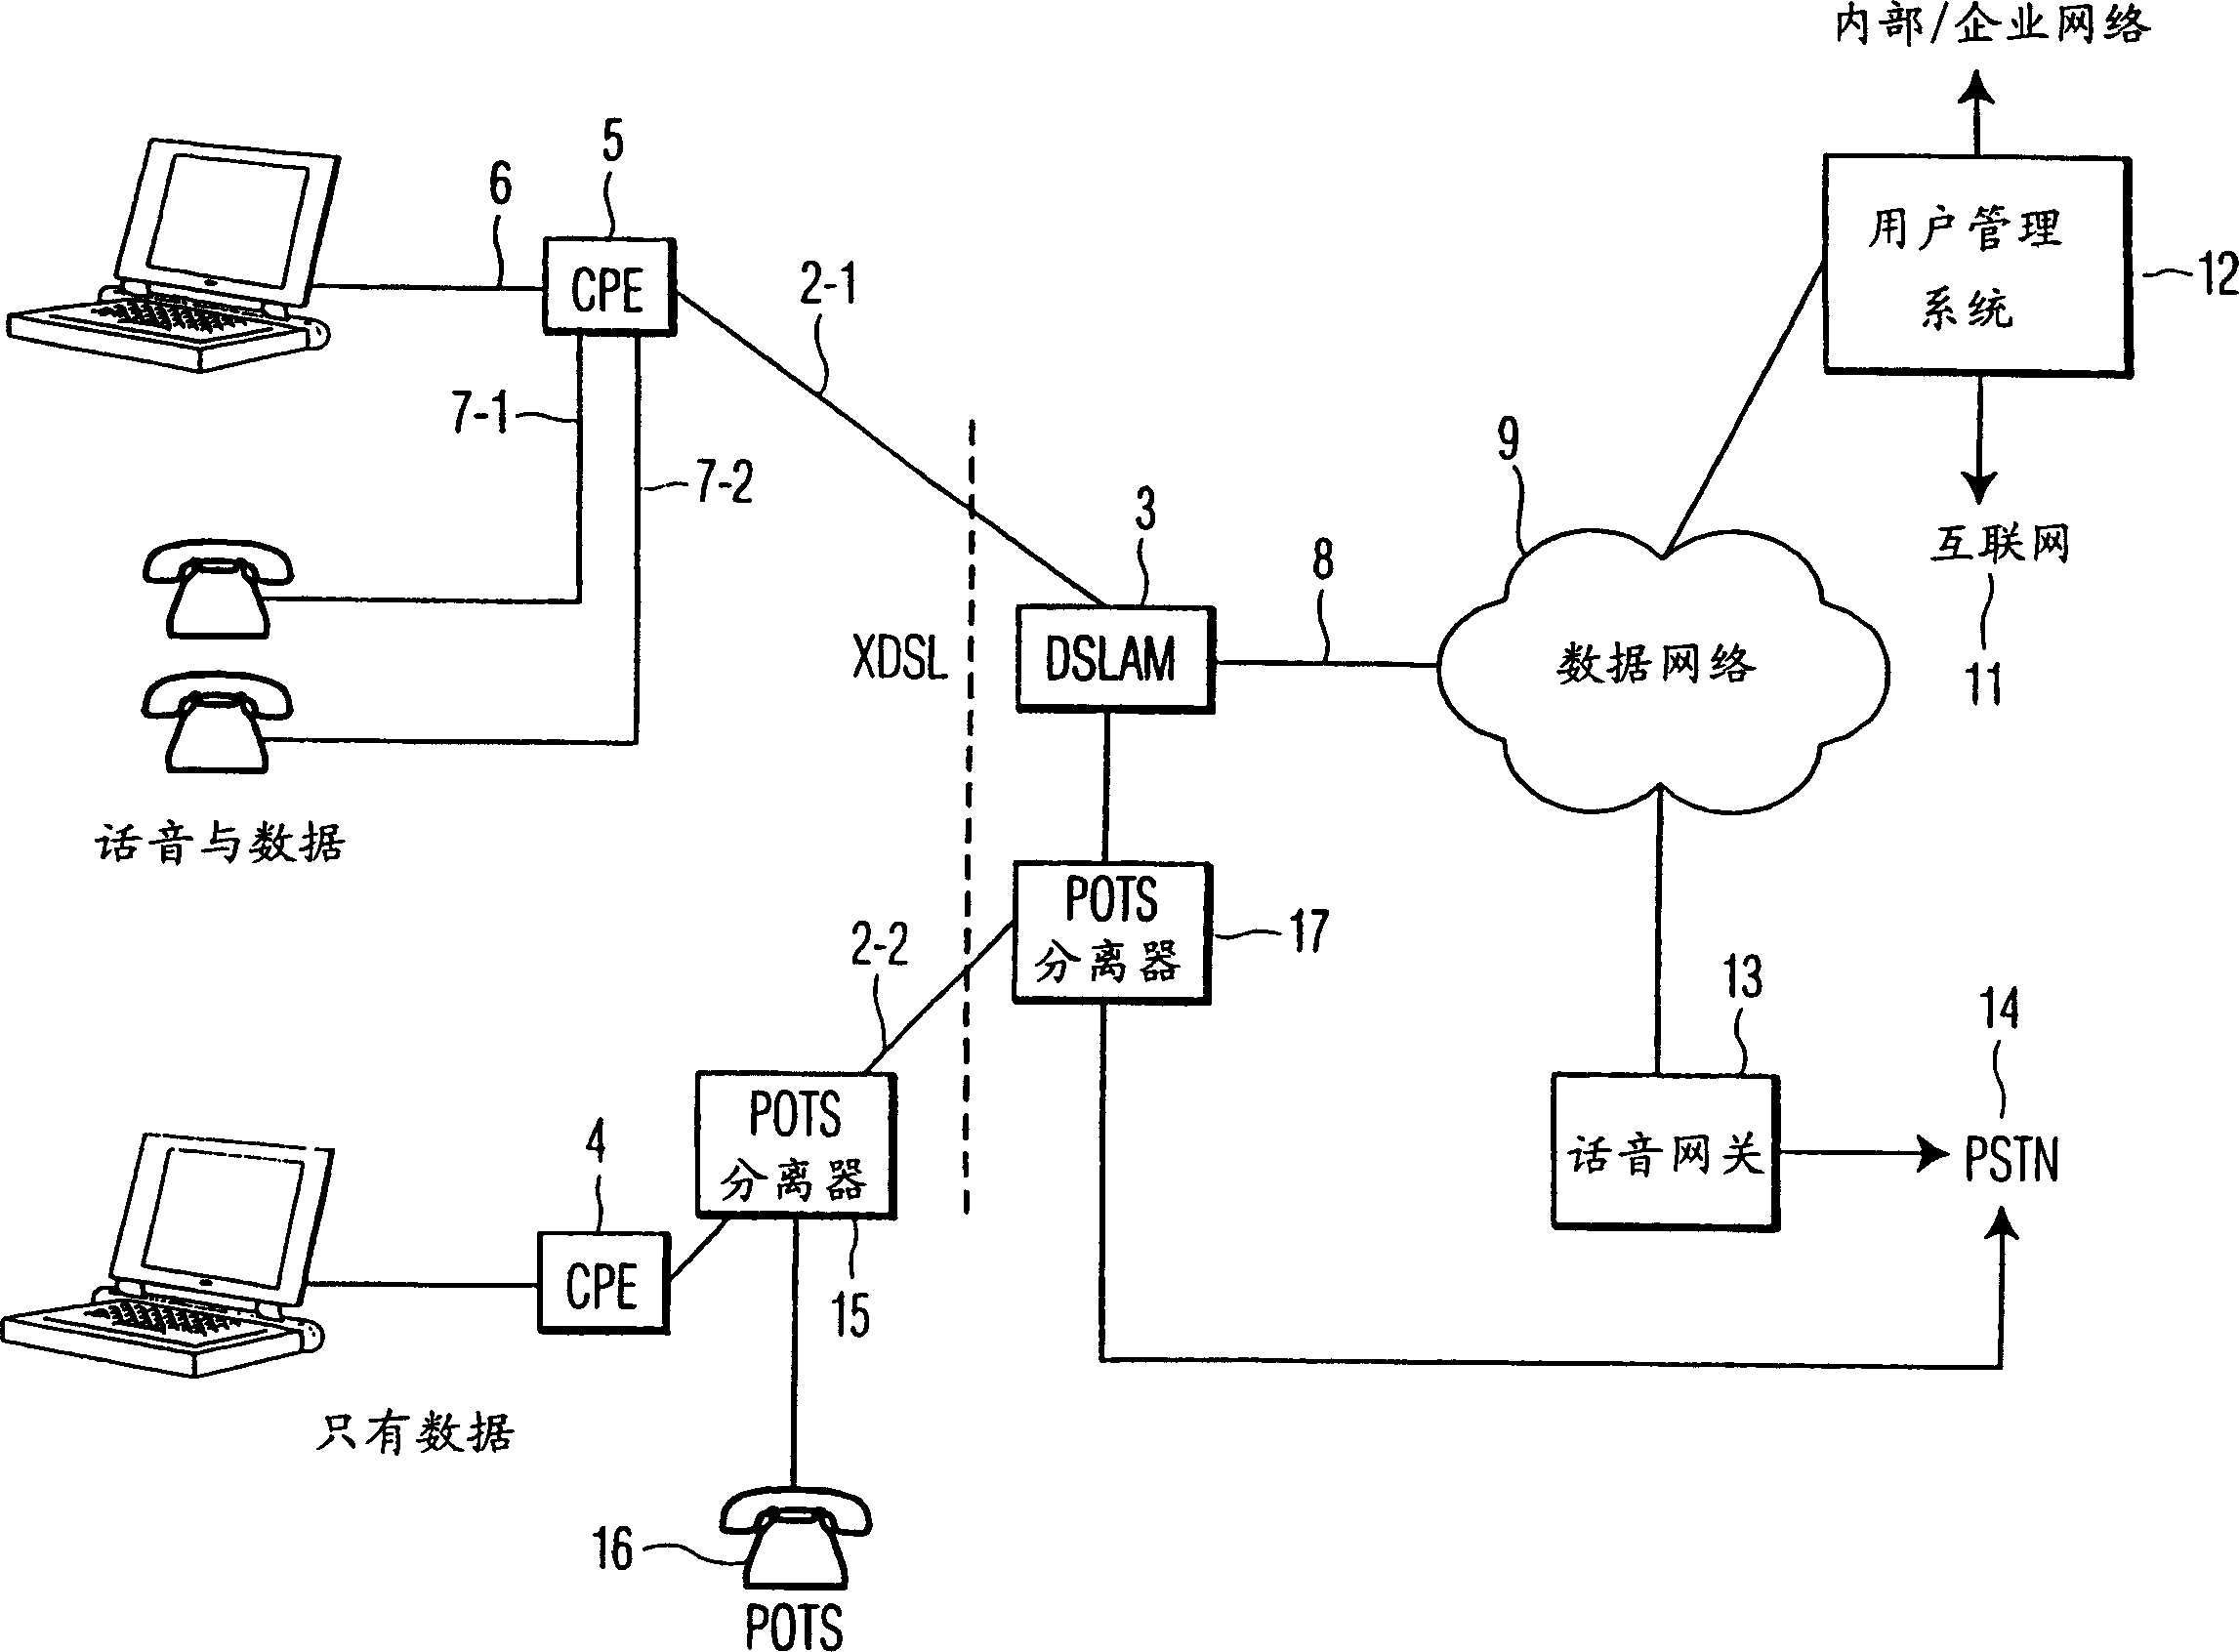 System and method for providing voice and /or data services